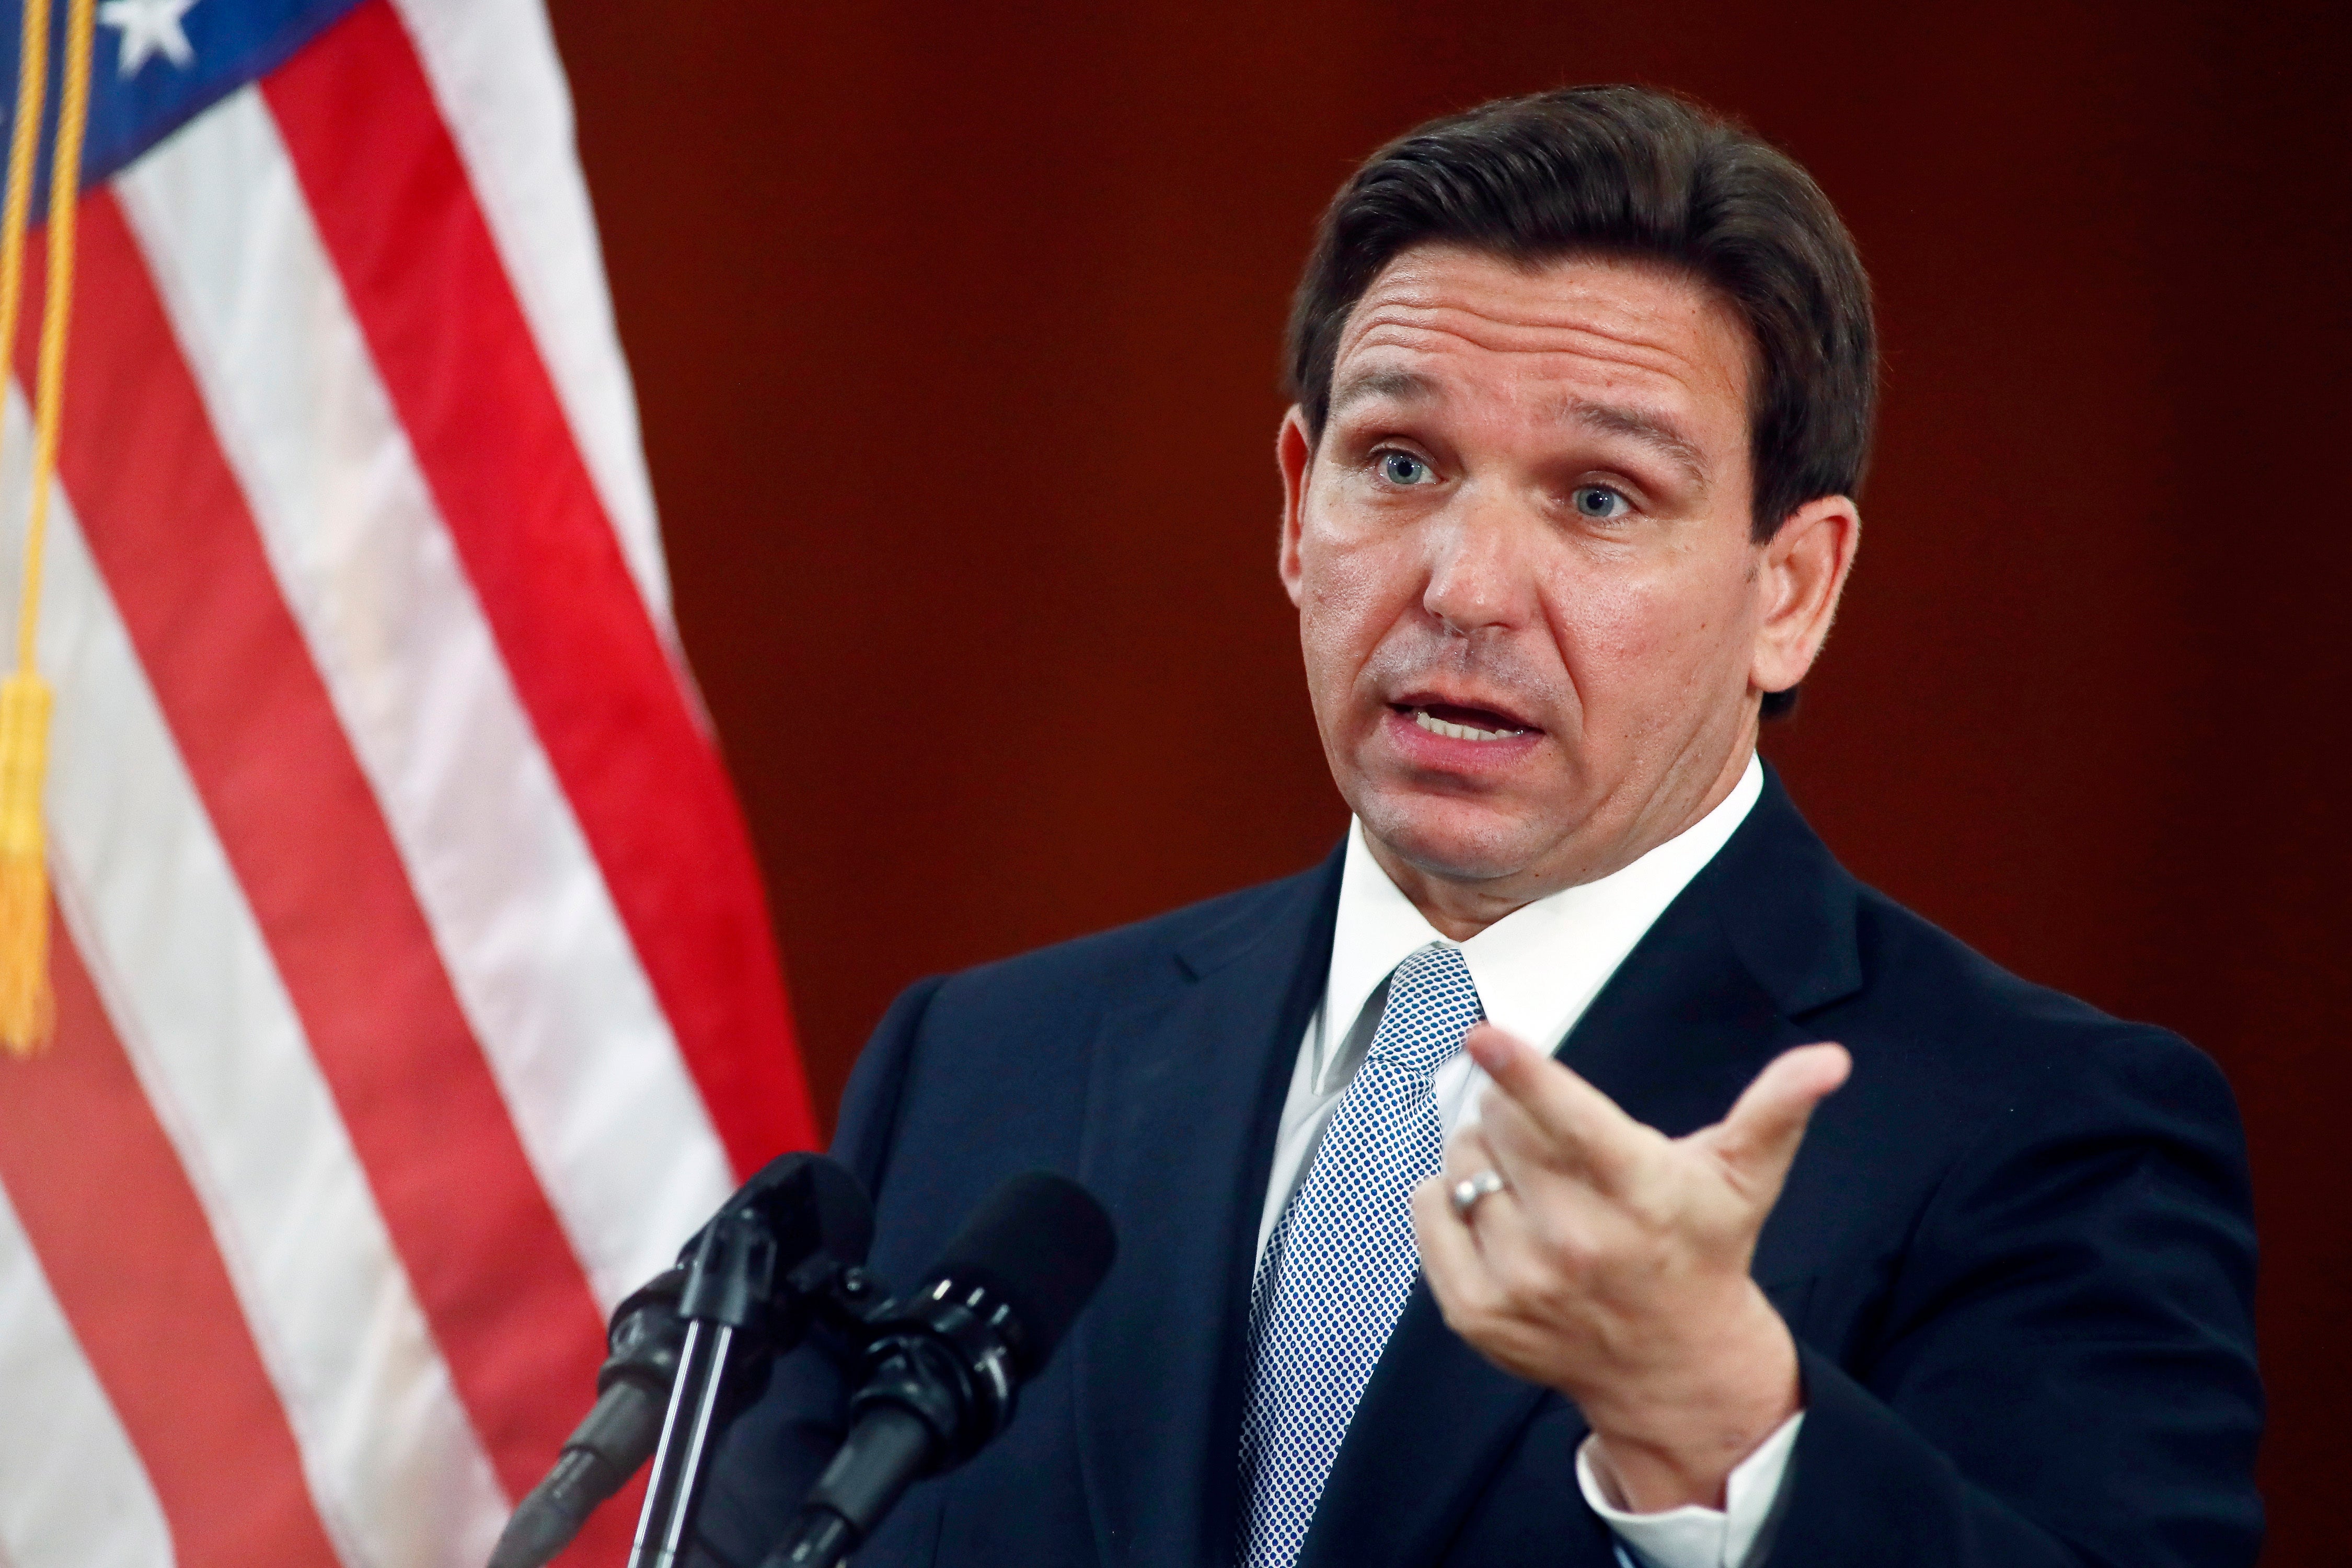 Ron DeSantis is a front runner for the next Republican presidential candidate